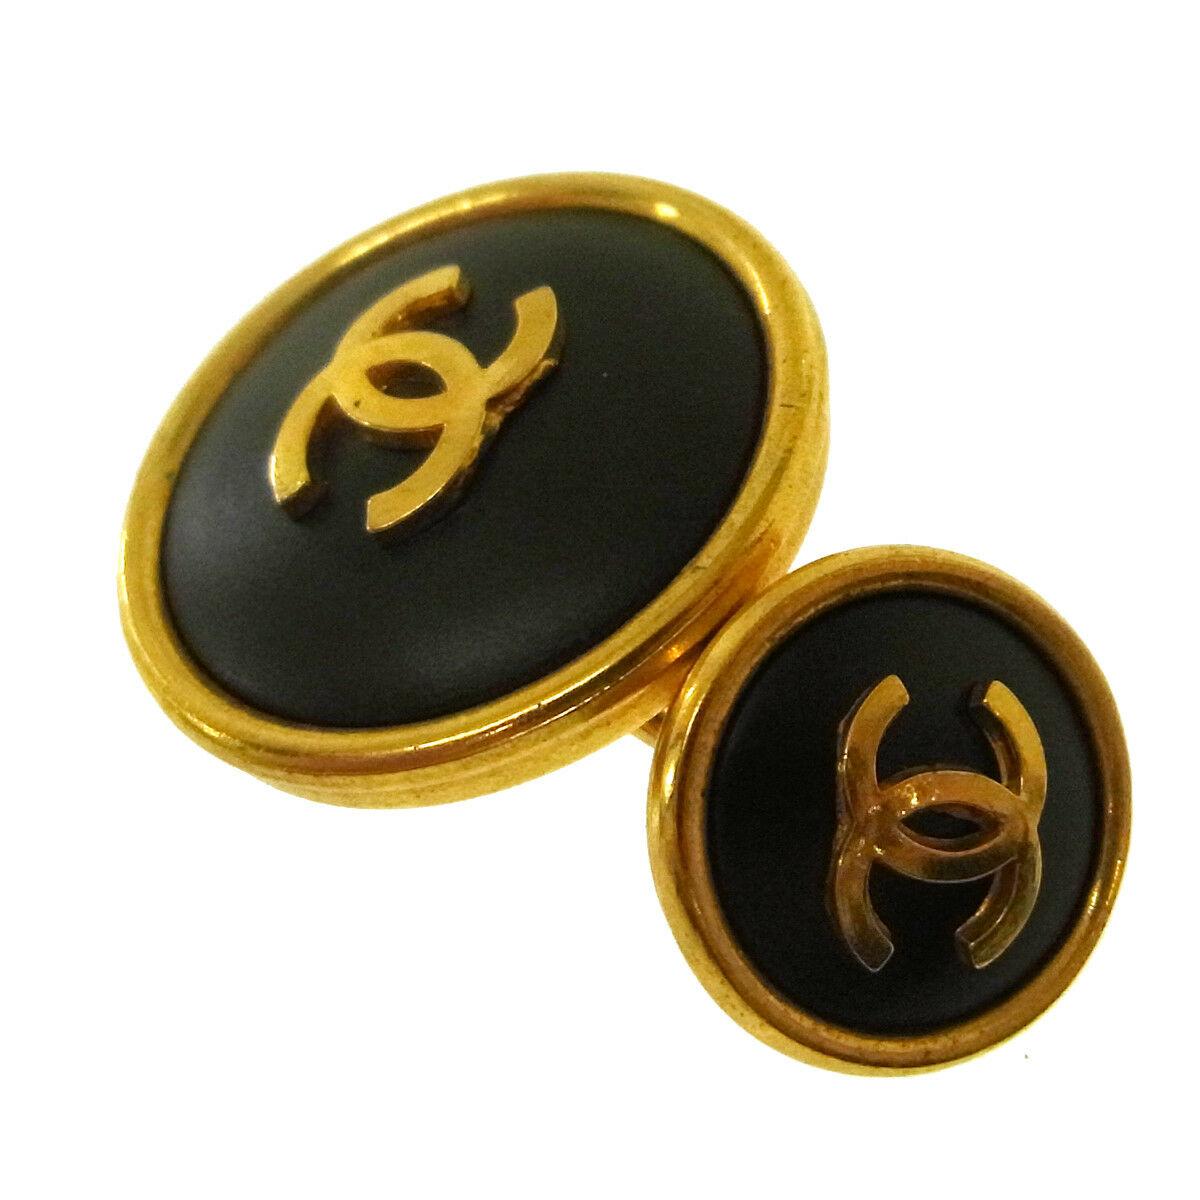 Chanel Black Gold Round Stud Charm Button Men's Women's Suit Cufflinks in Box

Metal
Gold tone 
Measures 0.75